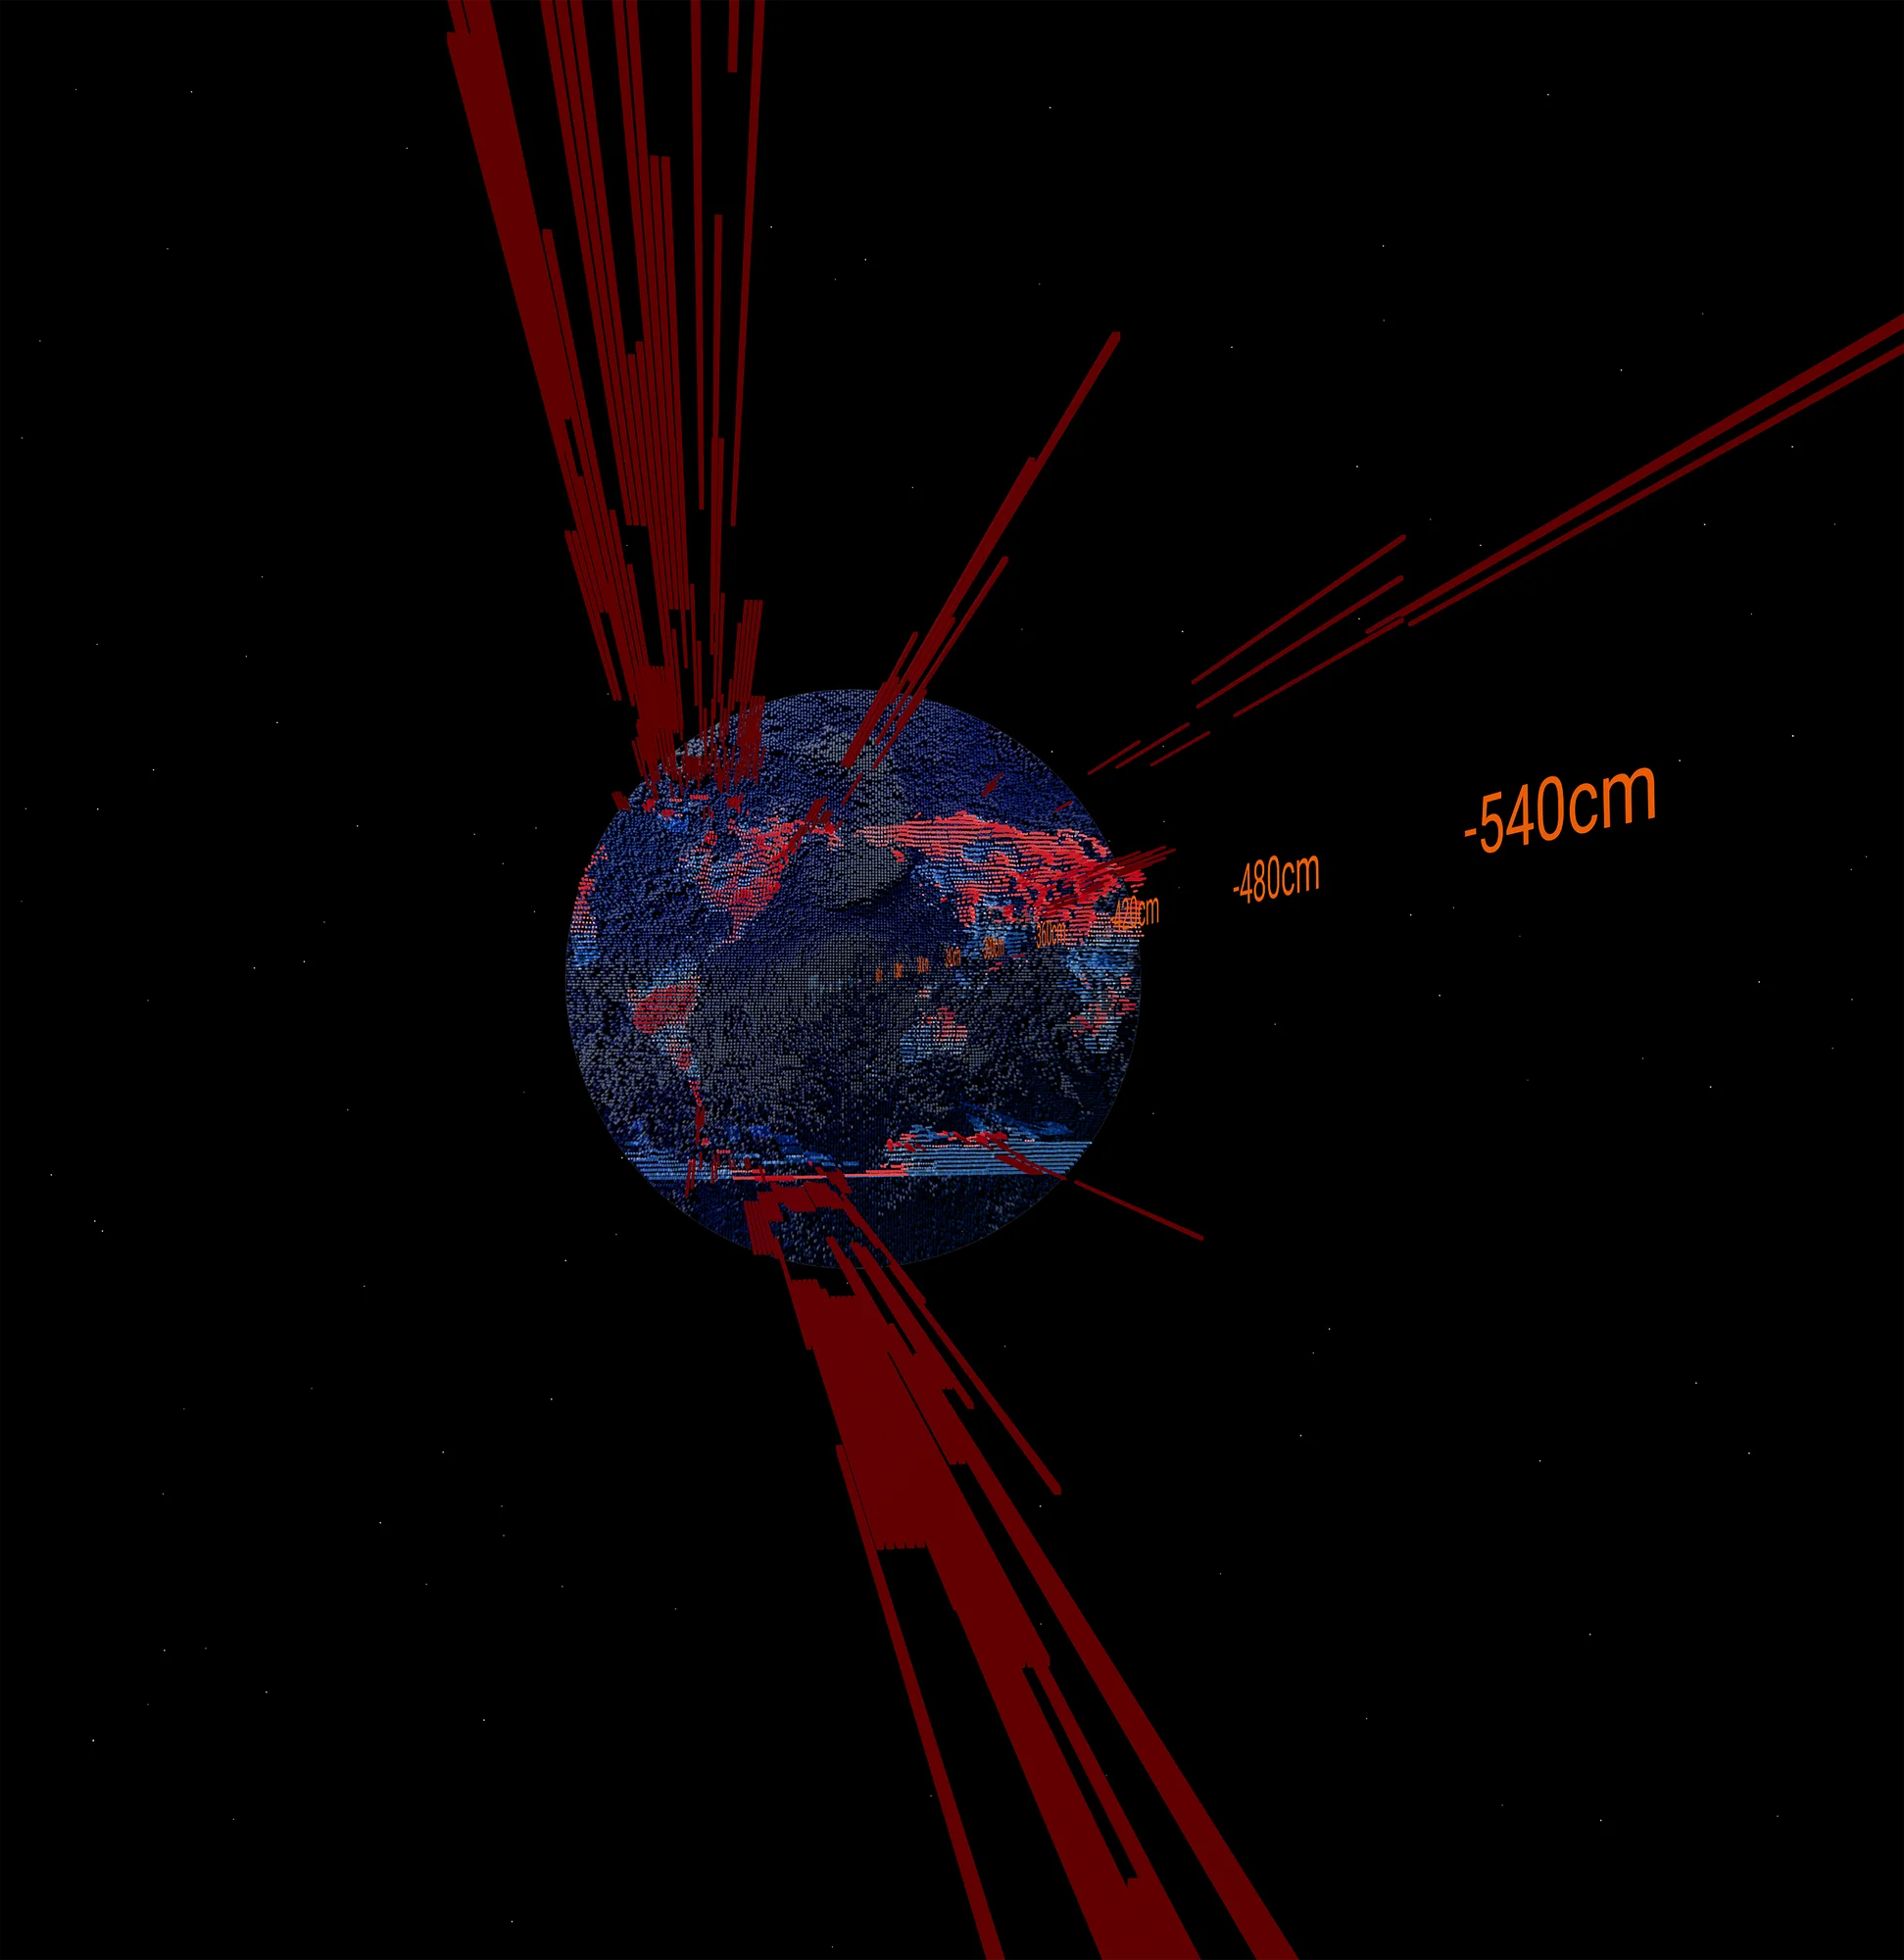 Still image taken from the interactive experiment Passage of Water showing planet earth and the water loss and gain over time.